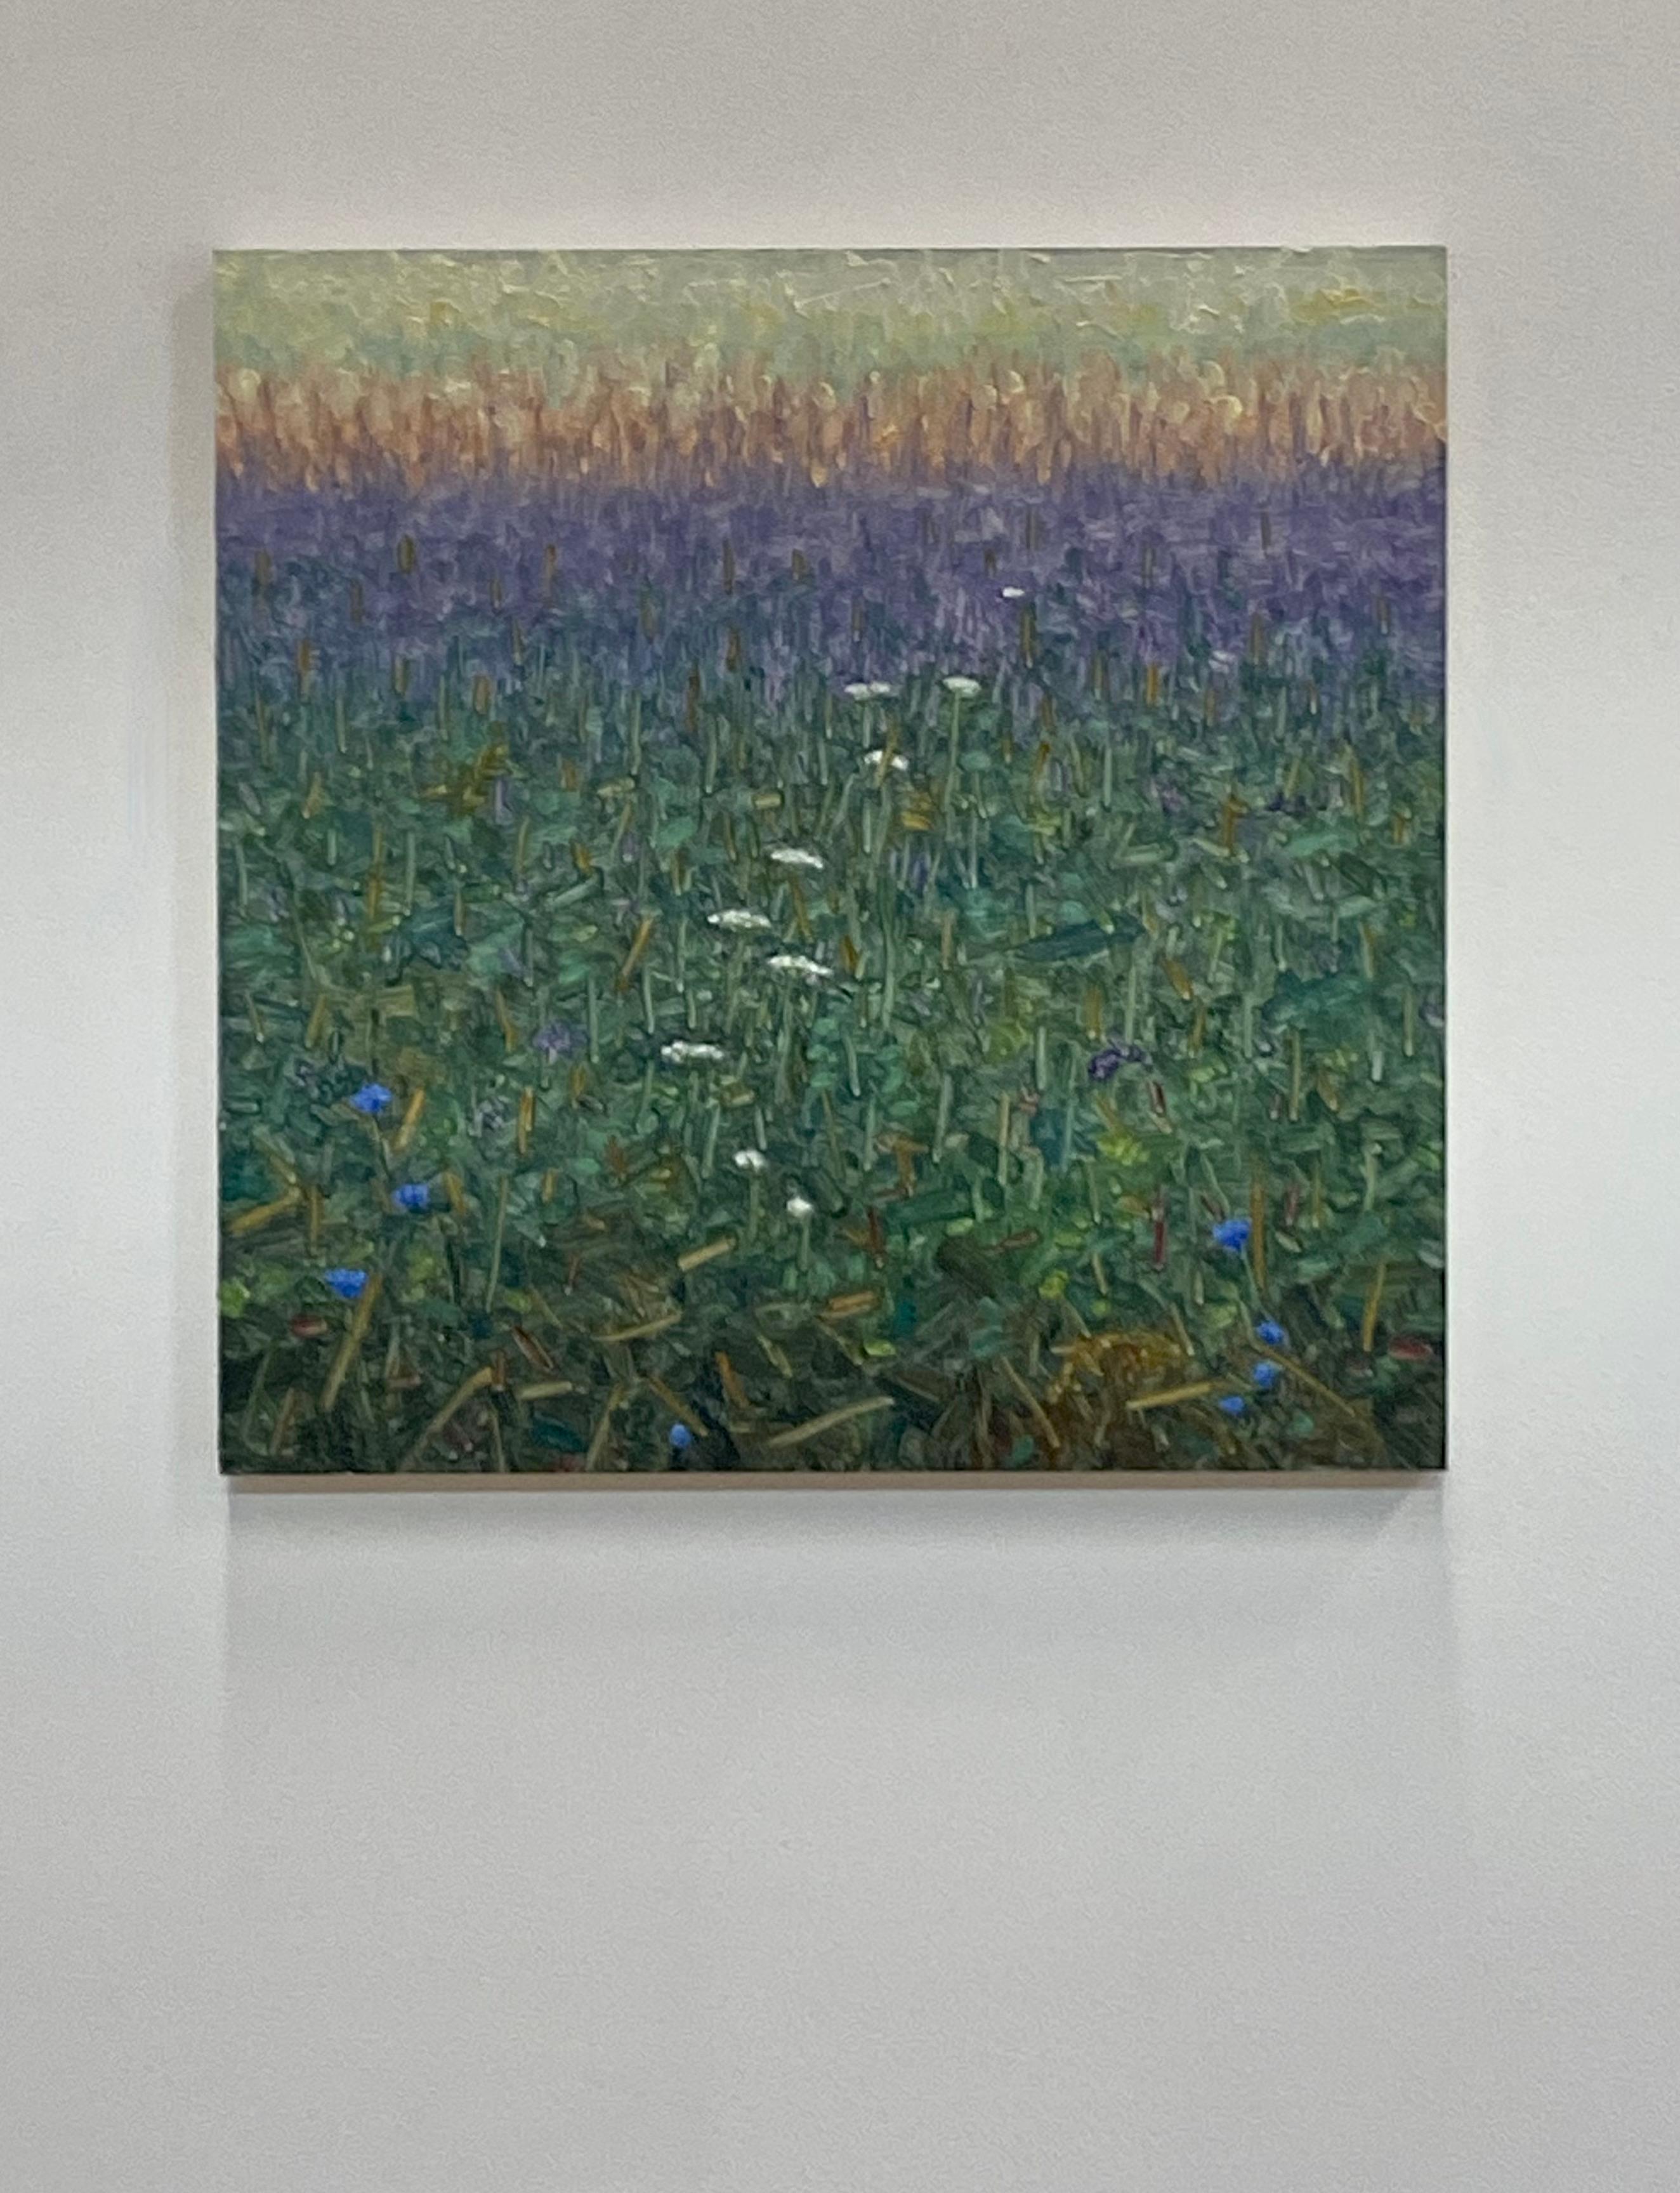 A peaceful outdoor scene of a delicately painted field with periwinkle blue flowers, lavender and white Queen Anne's lace, beautifully capturing the idyllic feel of a field of wildflowers and tall grass in early August. Signed, dated and titled on